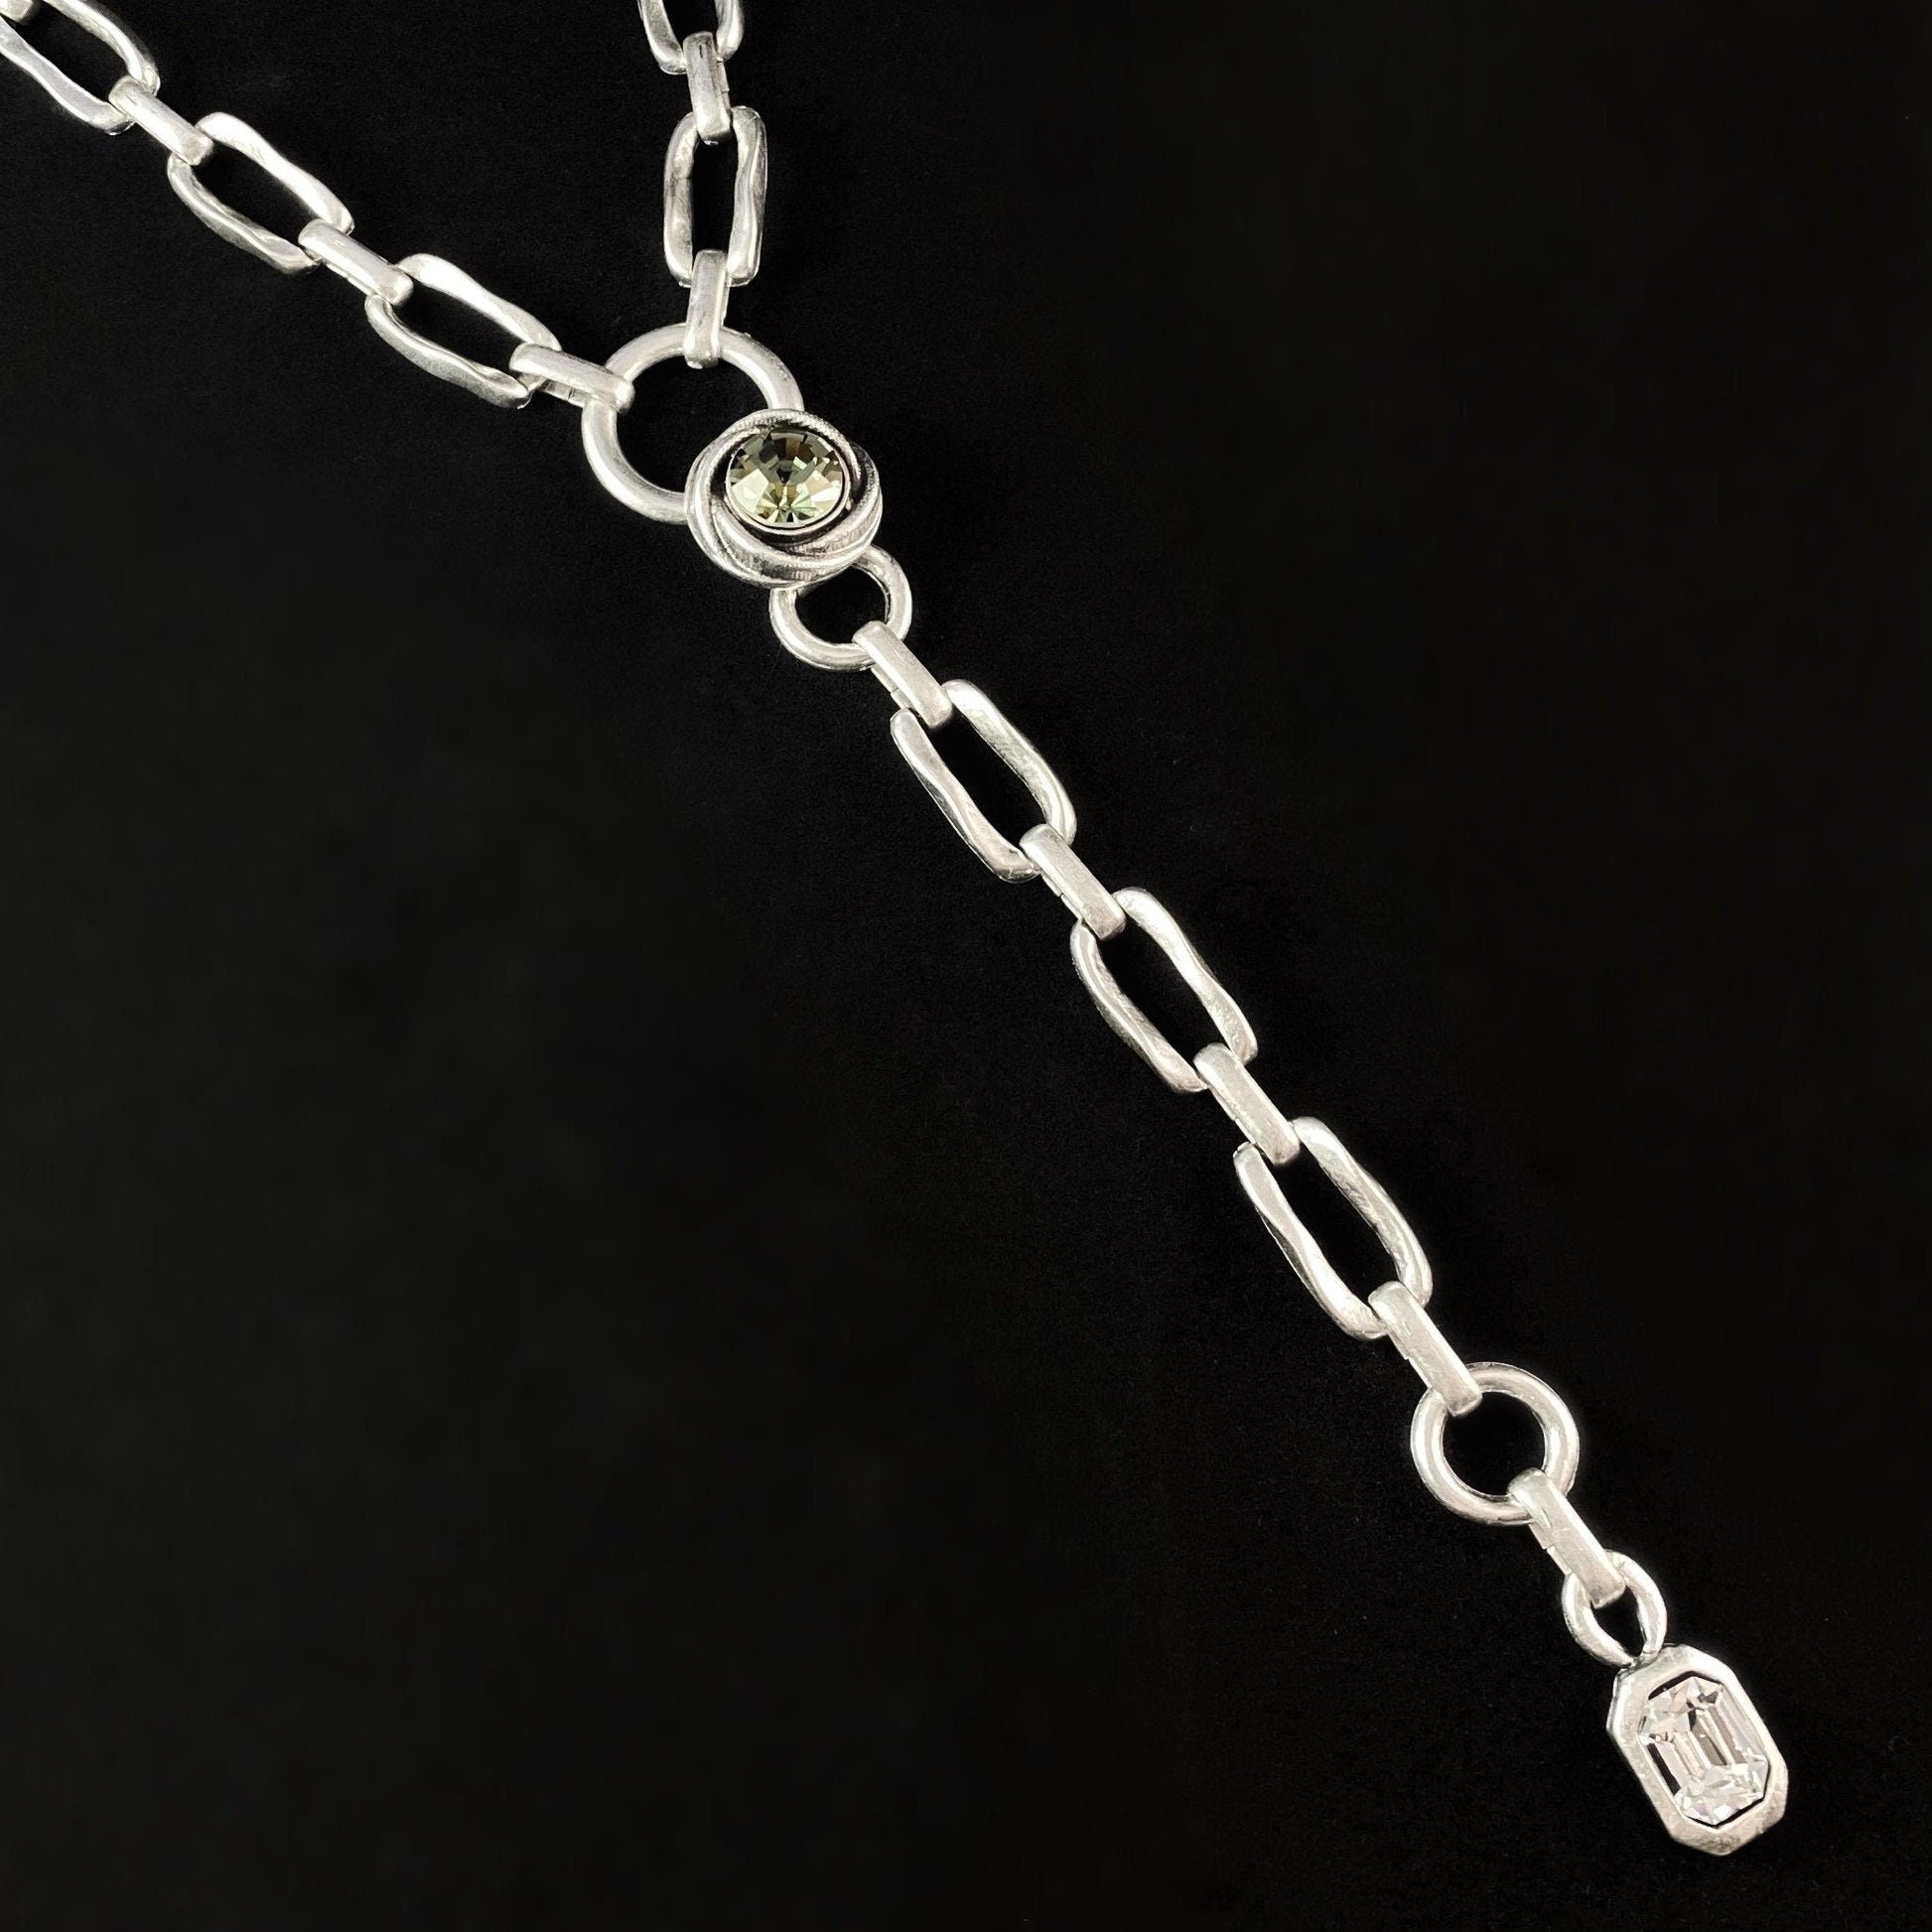 Long Silver Chain Link Necklace with Crystals, Handmade, Nickel Free